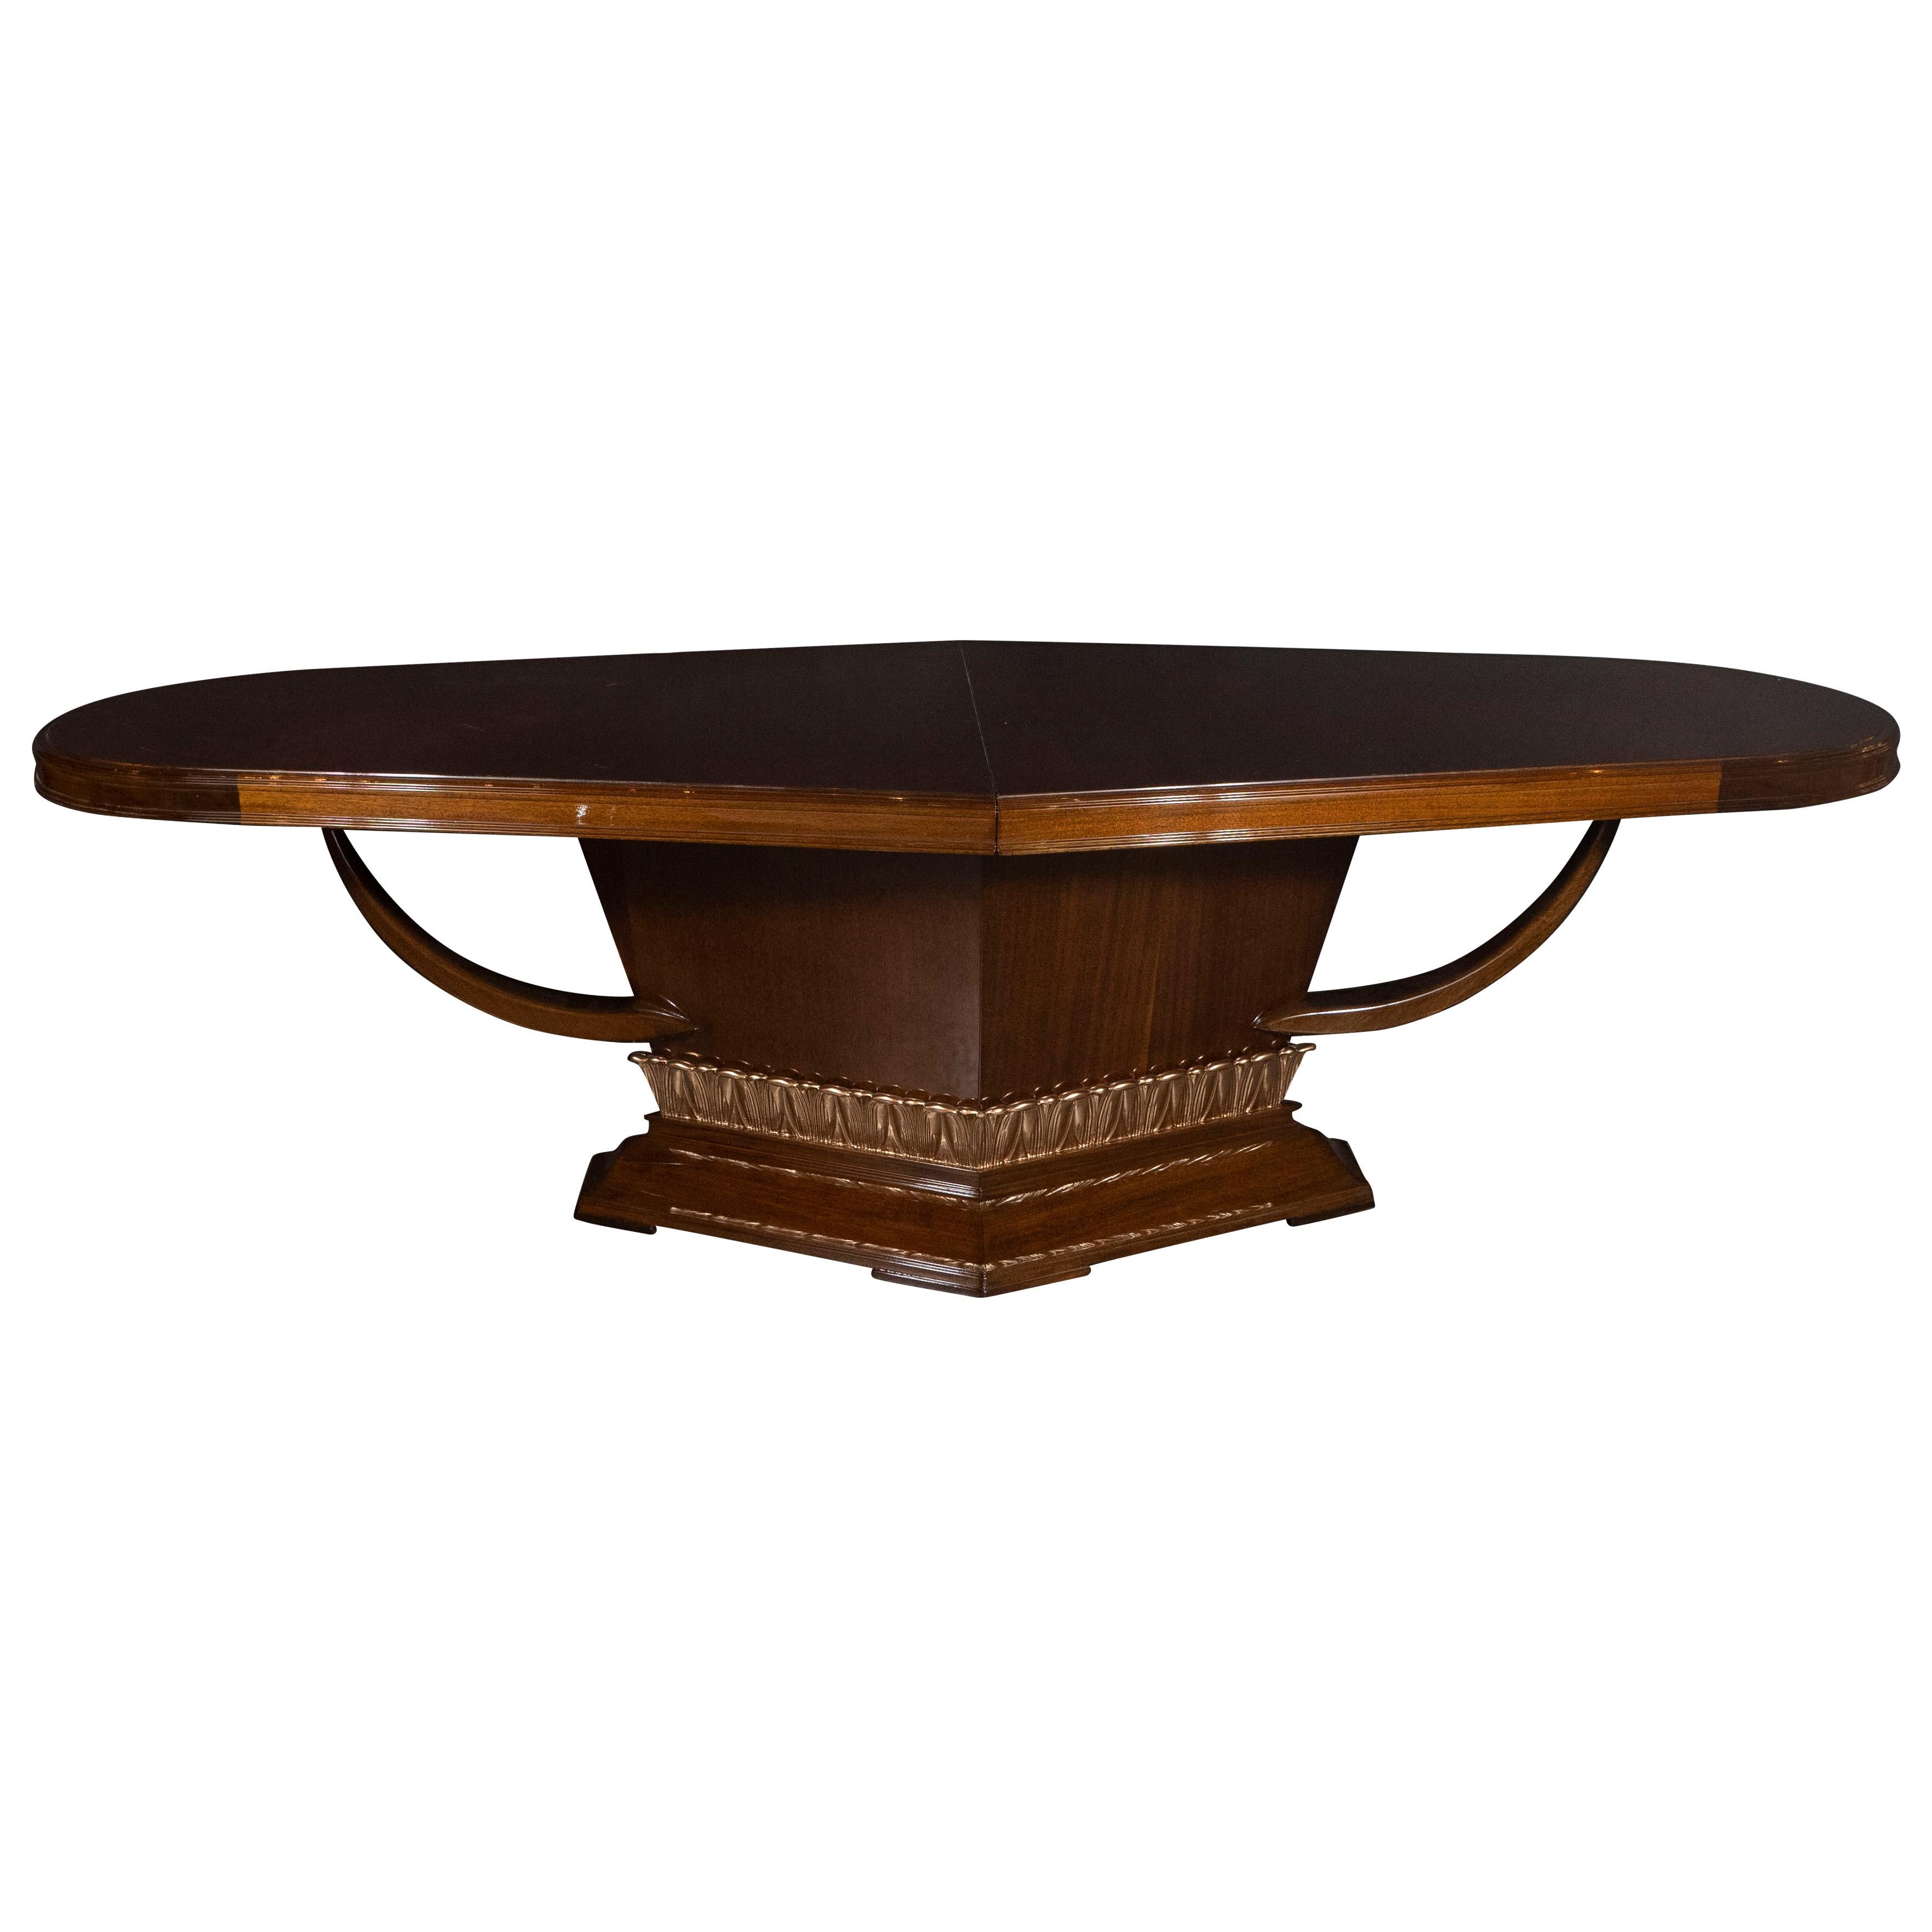 Art Deco Book Matched Mahogany Dining Table with 24-Karat Gilt Acanthus Details